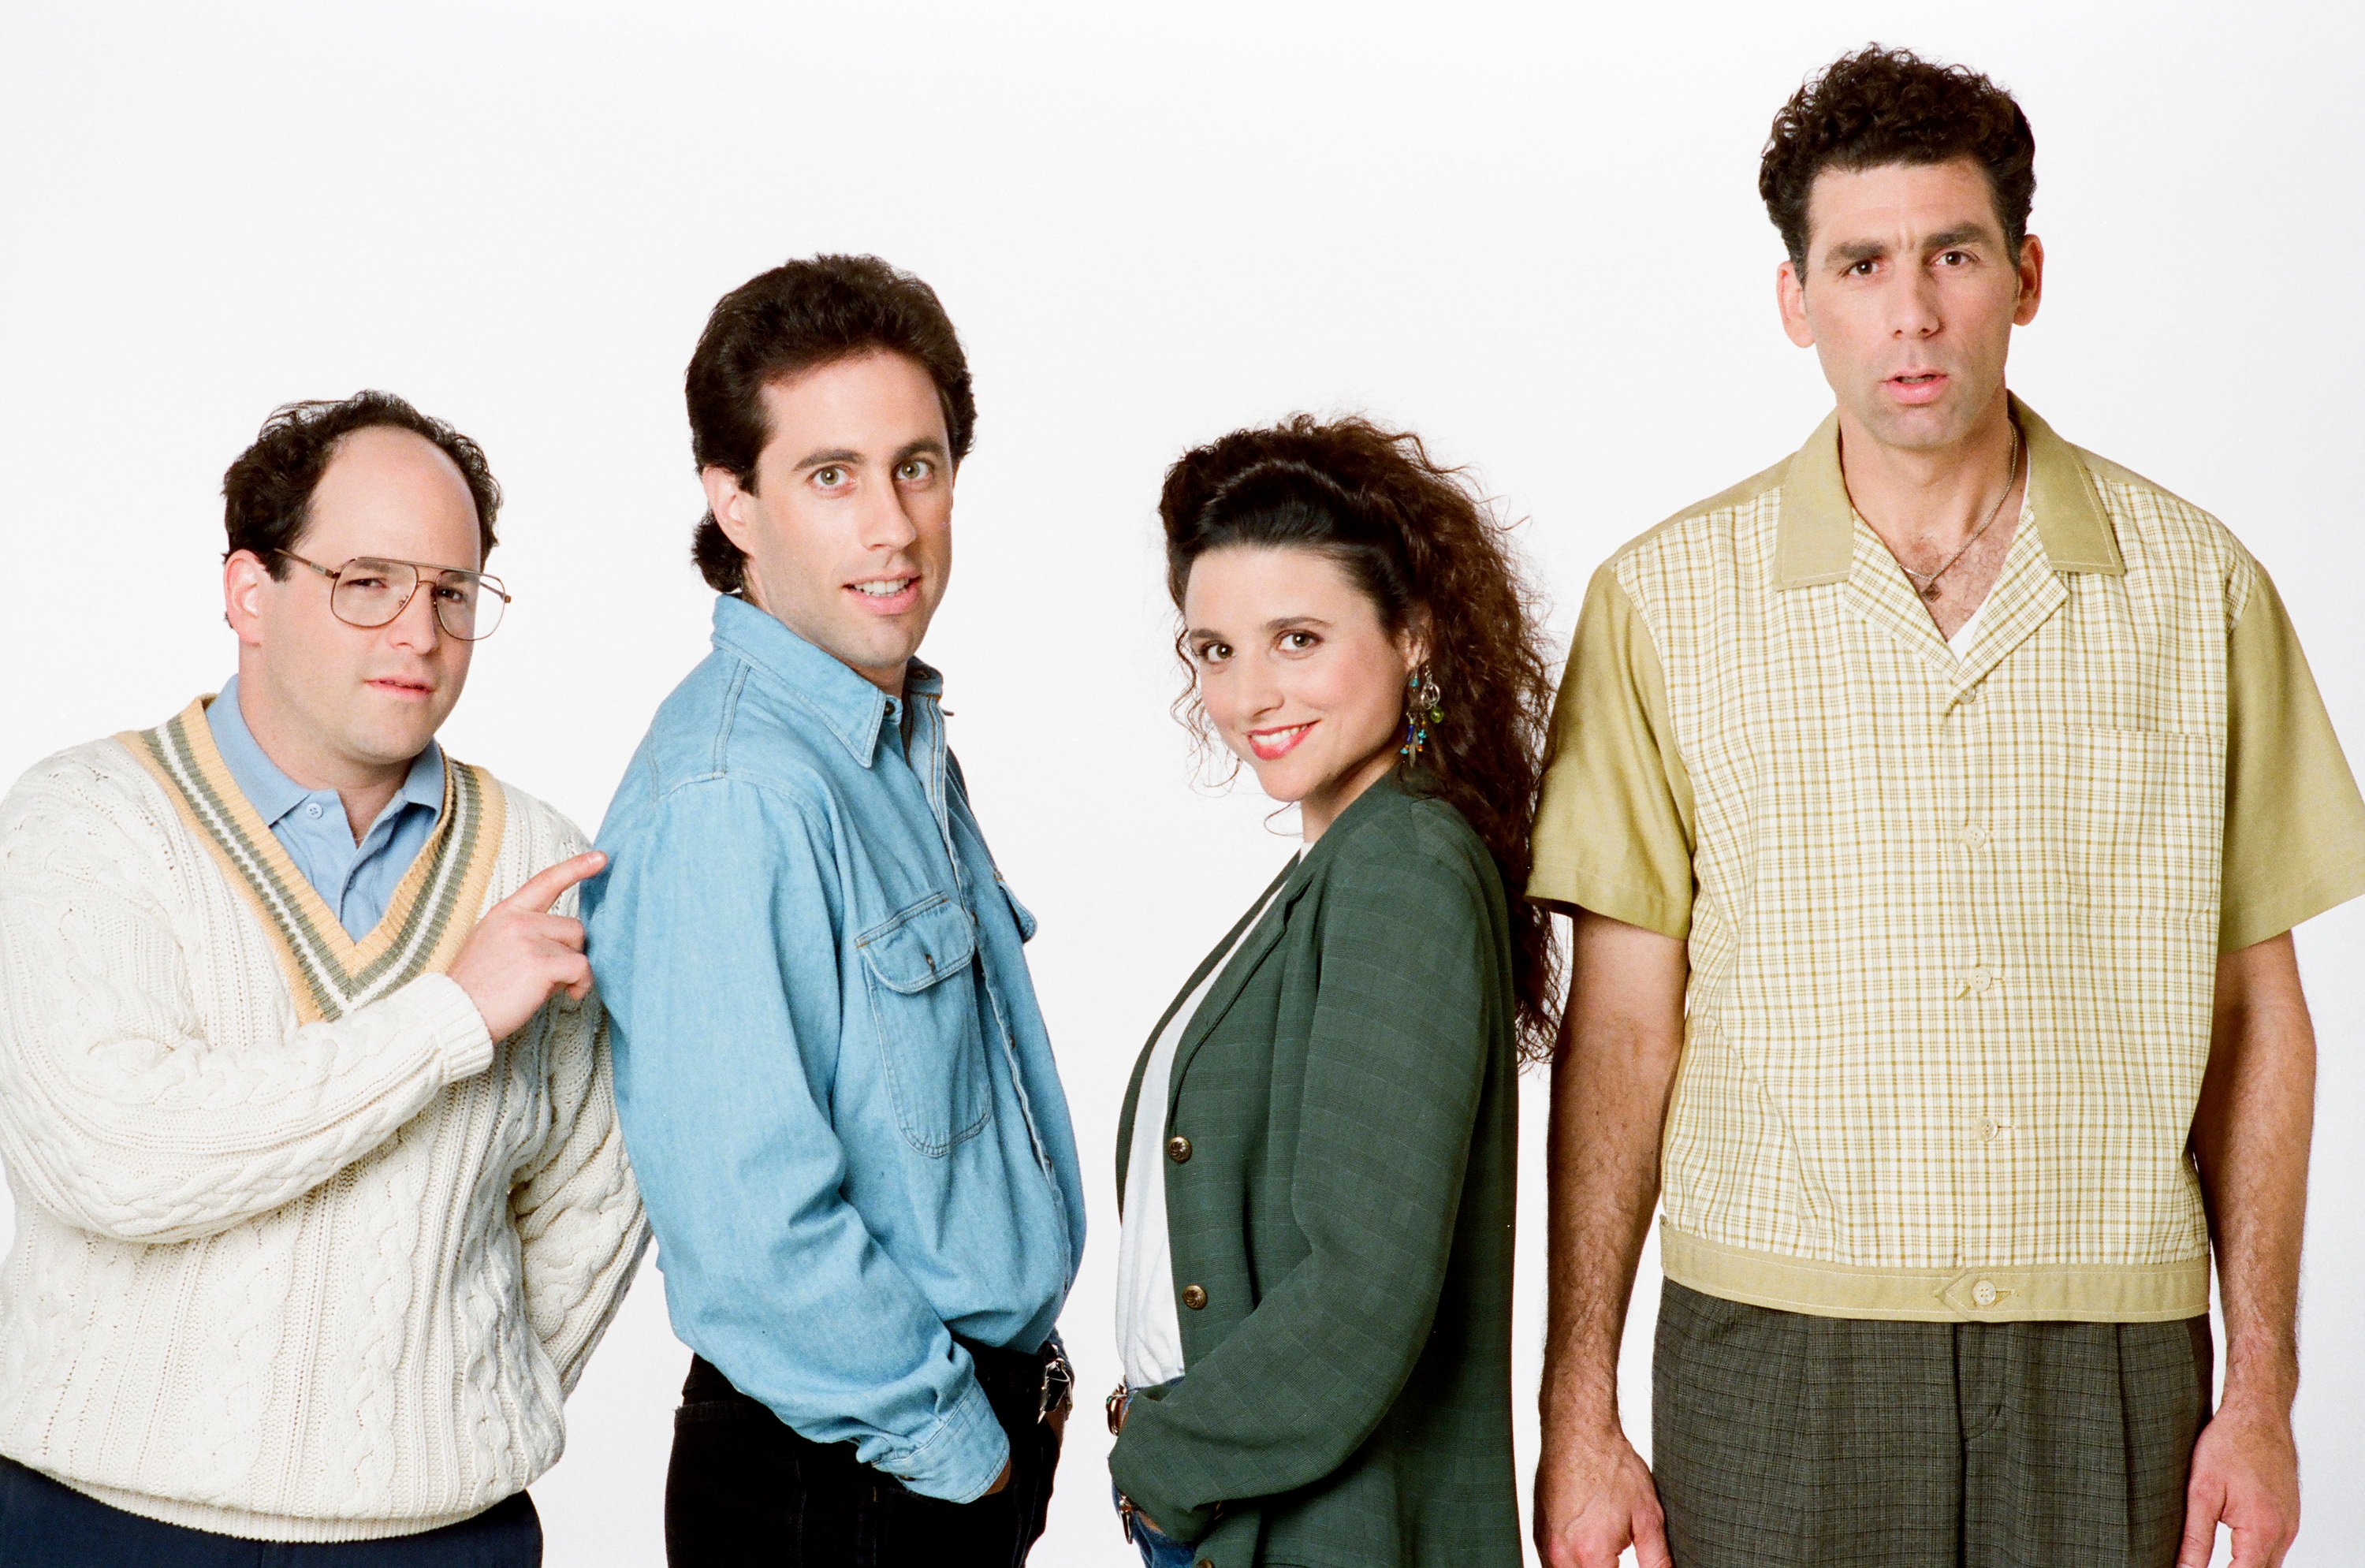 Seinfeld': Jerry and Elaine's Relationship Timeline Makes No Sense